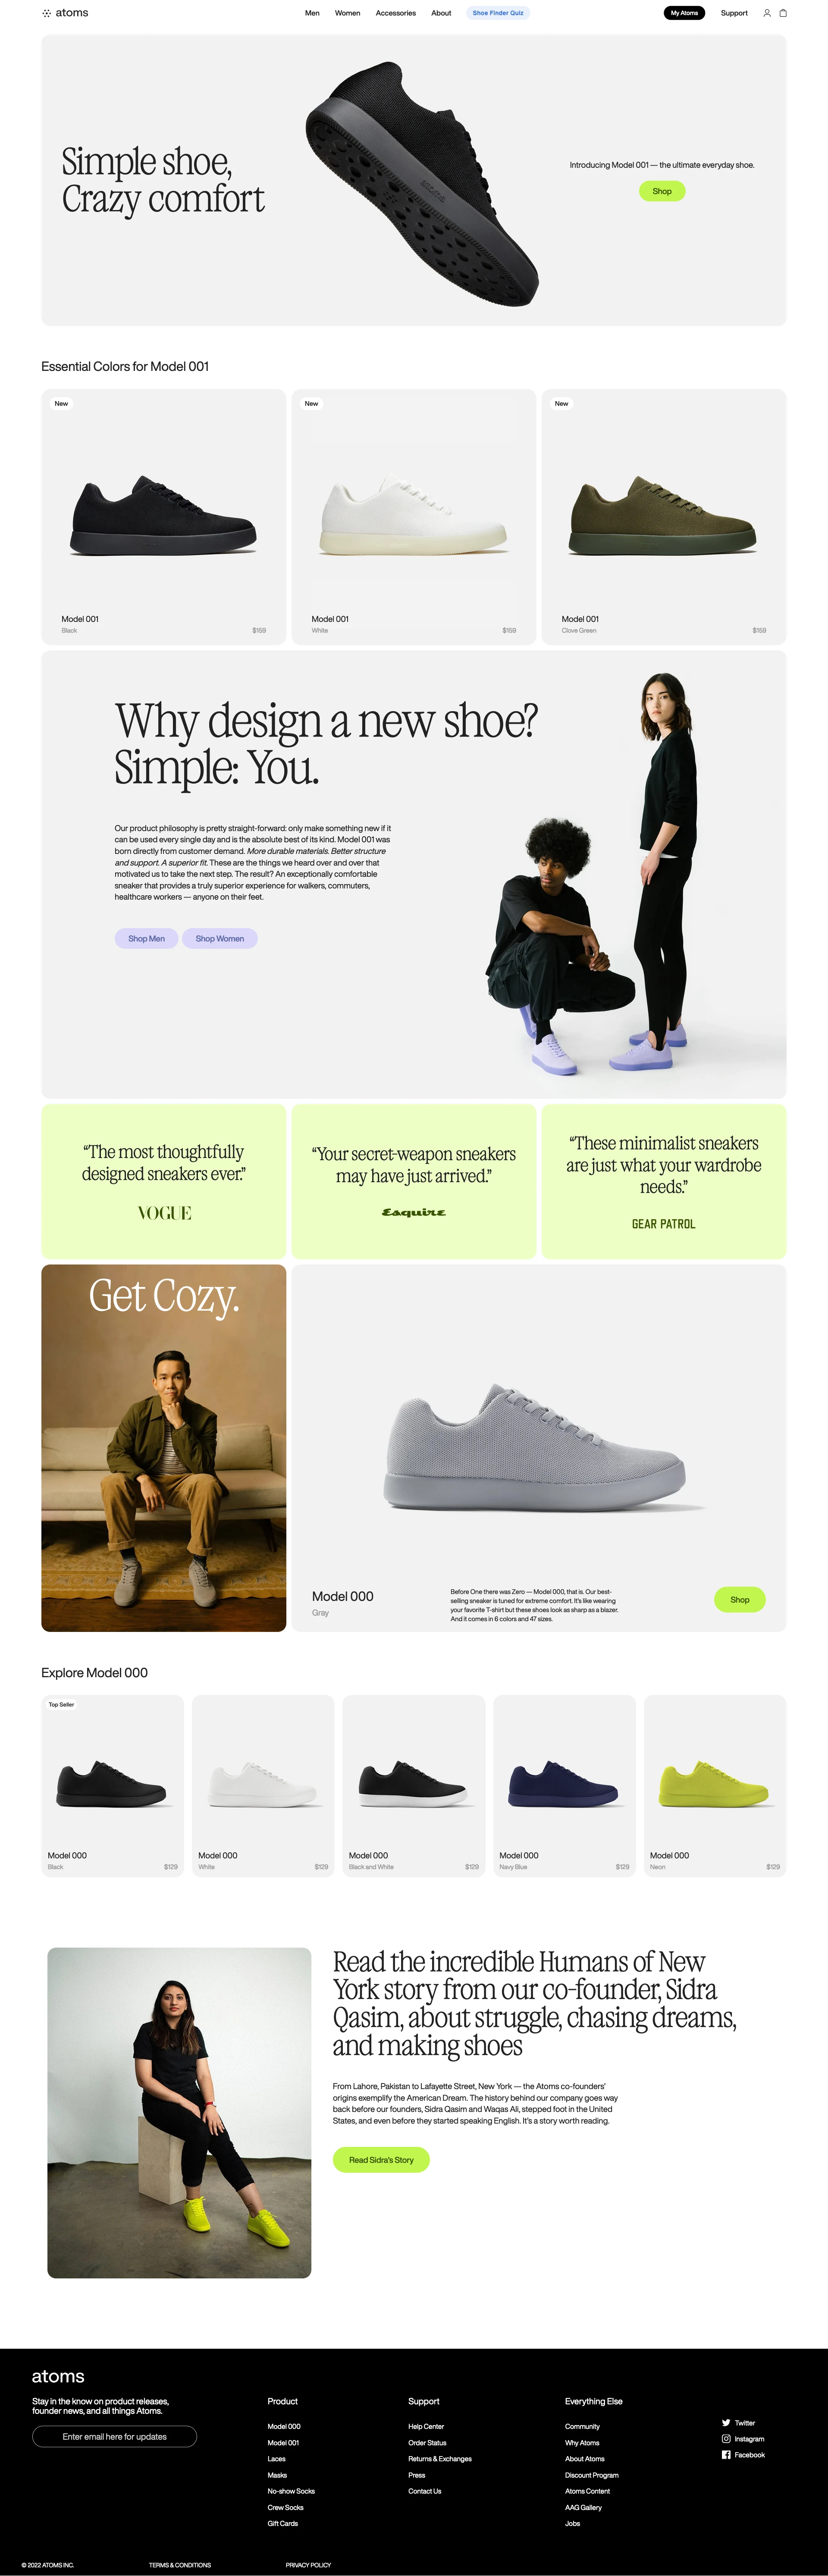 Atoms Landing Page Example: Atoms are the most comfortable shoes for everyday wear. Elastic laces, copper lining, breathable materials, simple design makes them ideal everyday shoes.